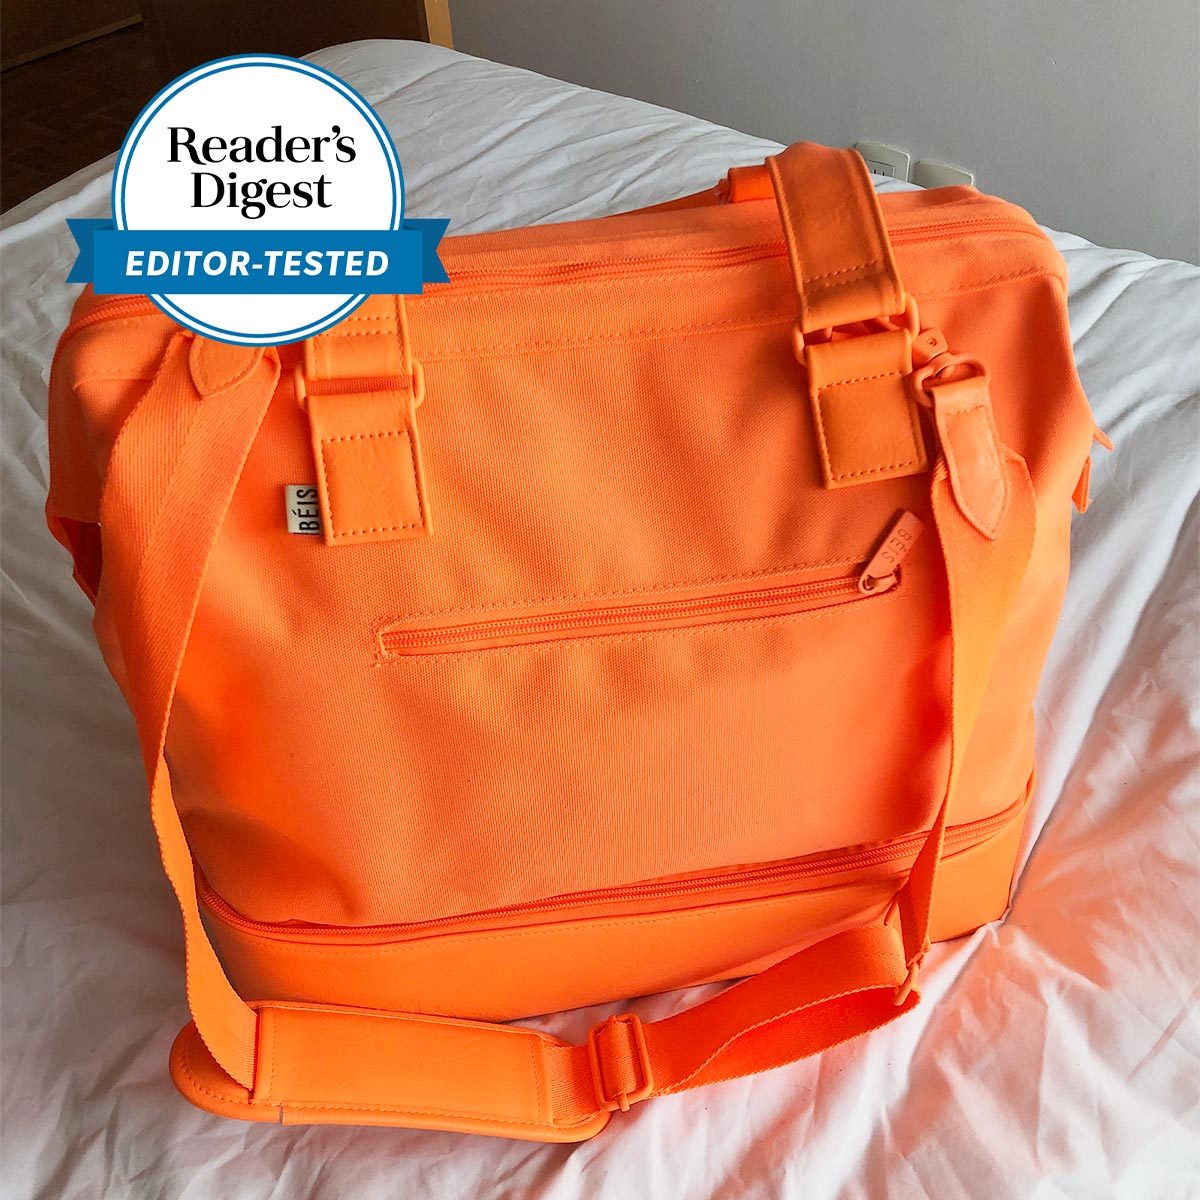 This weekender bag has compartments for your shoes, laptop and